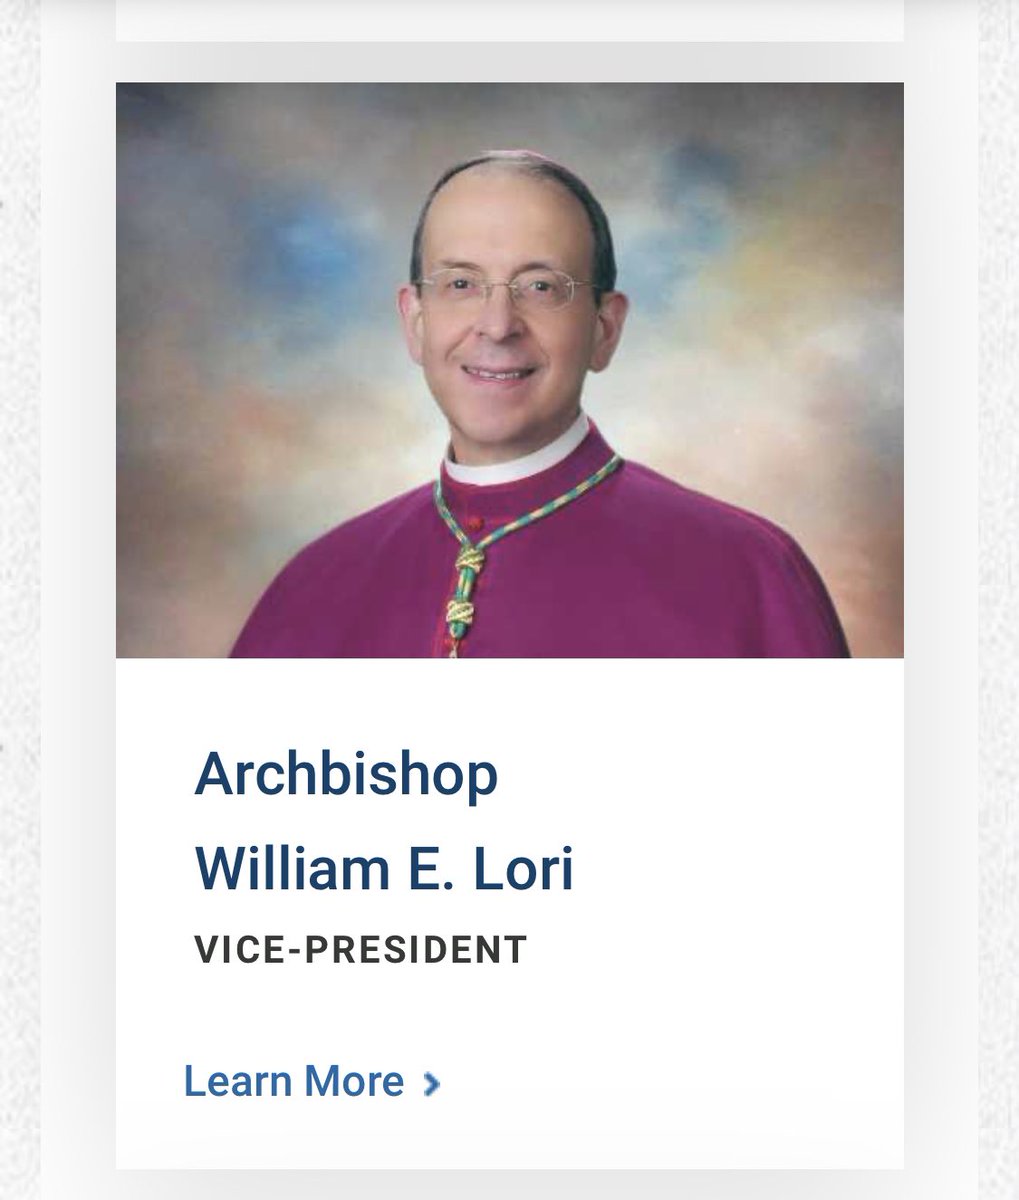 When #Catholics put money in the collection  basket on Sunday, done goes to him, the USCCB Vice Pres. & archbishop of #Baltimore who is an accessory/accomplice to #Catholic #ClergyAbuse & #ChildRape  #BoycottTheBishops